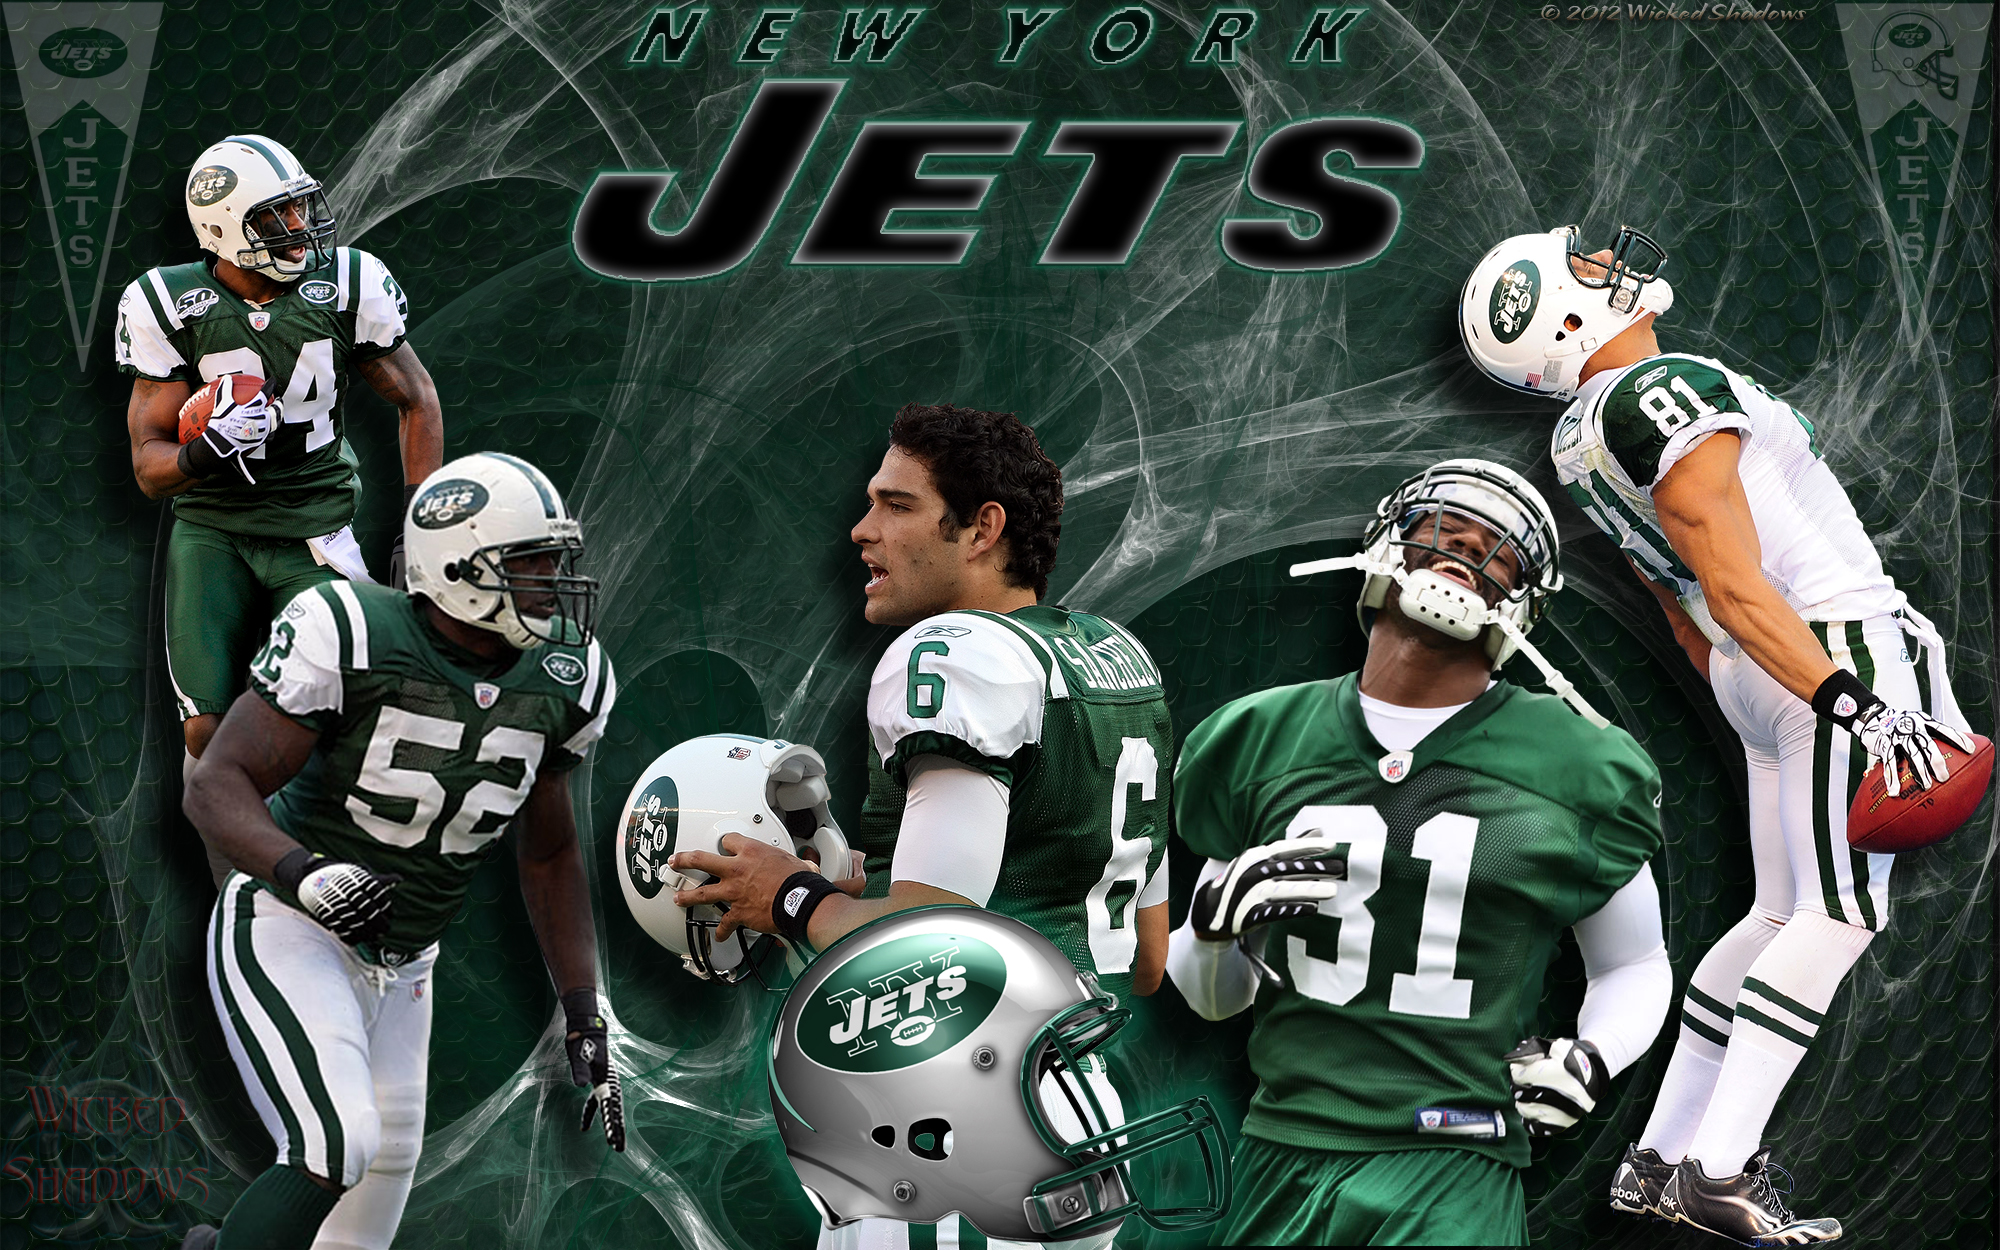 New York Jets Wallpaper Image Crazy Gallery